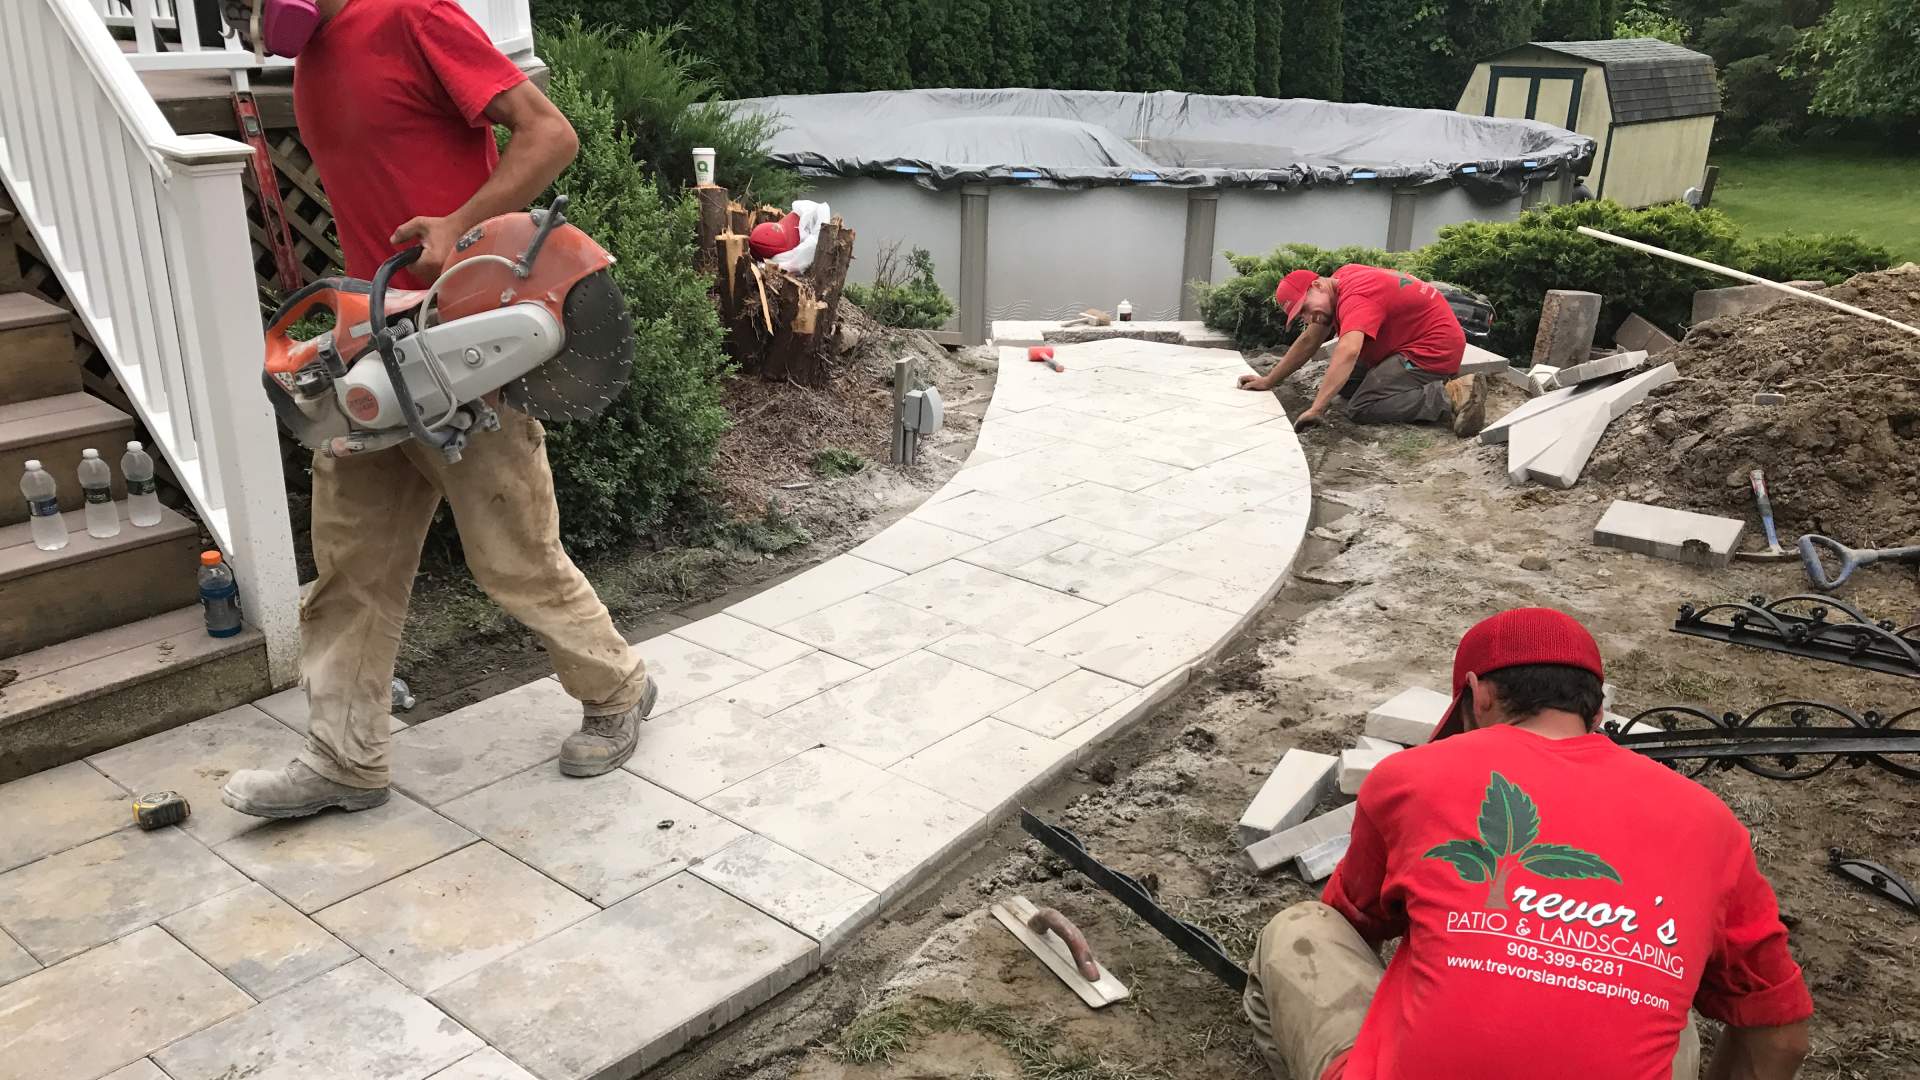 Professionals from Trevor's working on a project installation in Califon, NJ.